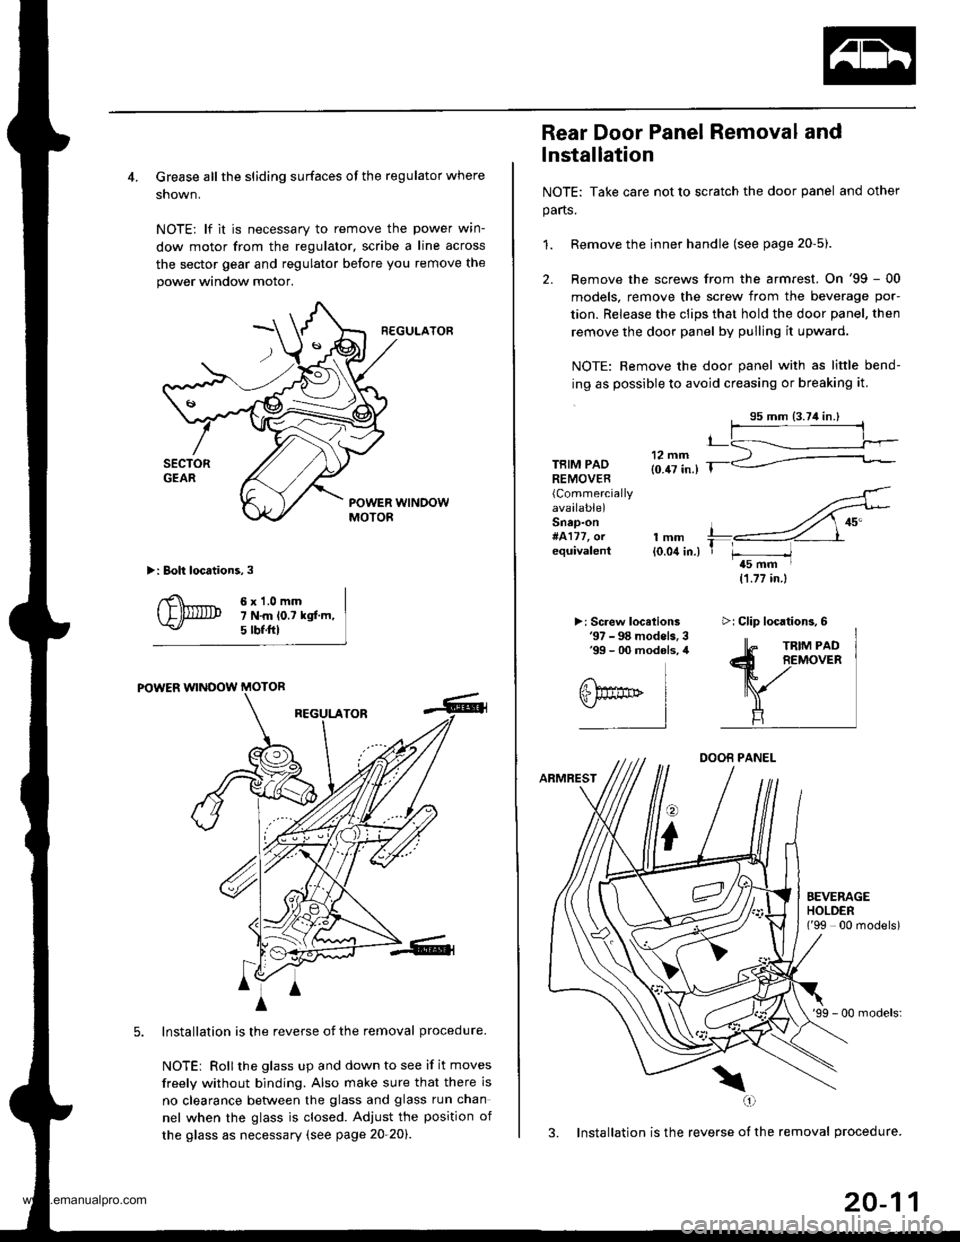 HONDA CR-V 1999 RD1-RD3 / 1.G Workshop Manual 
4. Grease all the sliding surfaces of the regulator where
shown.
NOTE: lf it is necessary to remove the power wrn-
dow motor from the regulator, scribe a line across
the sector gear and regulator bef